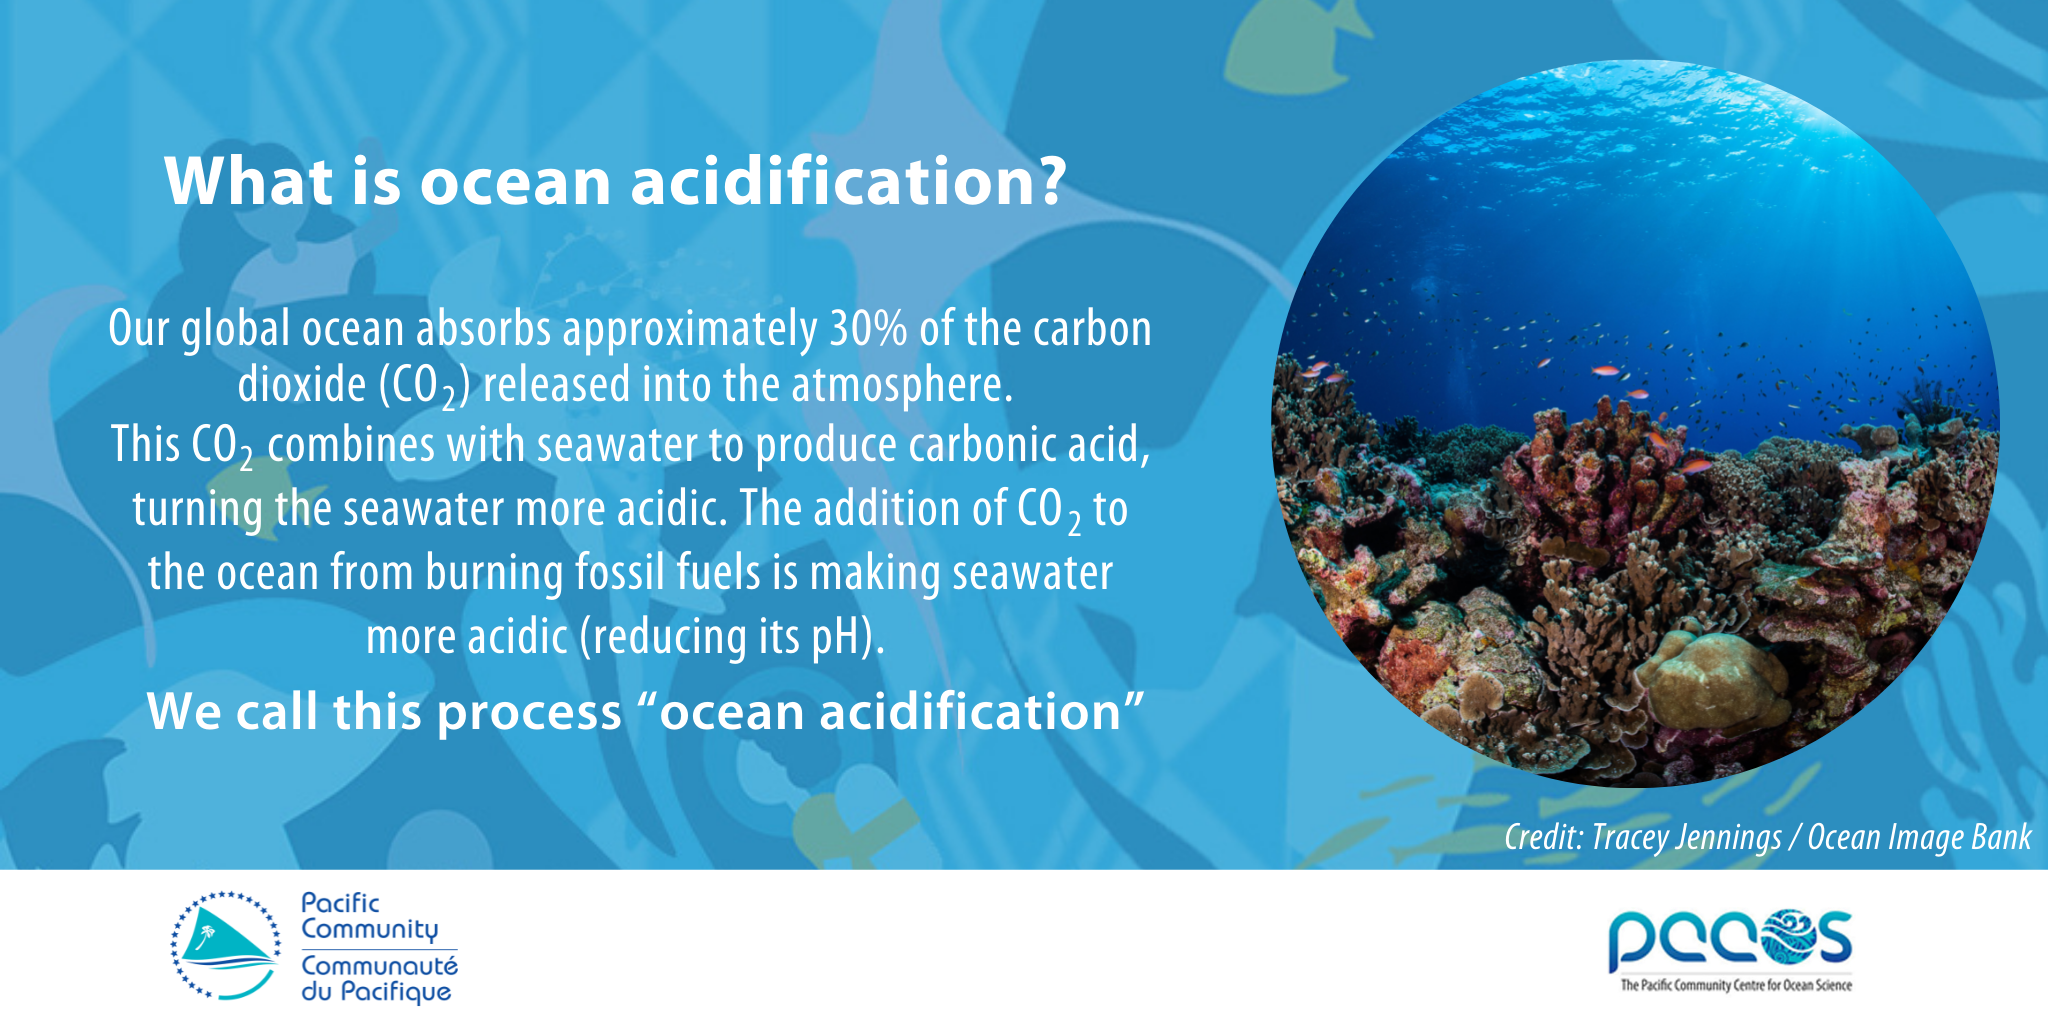 What is ocean acidification?